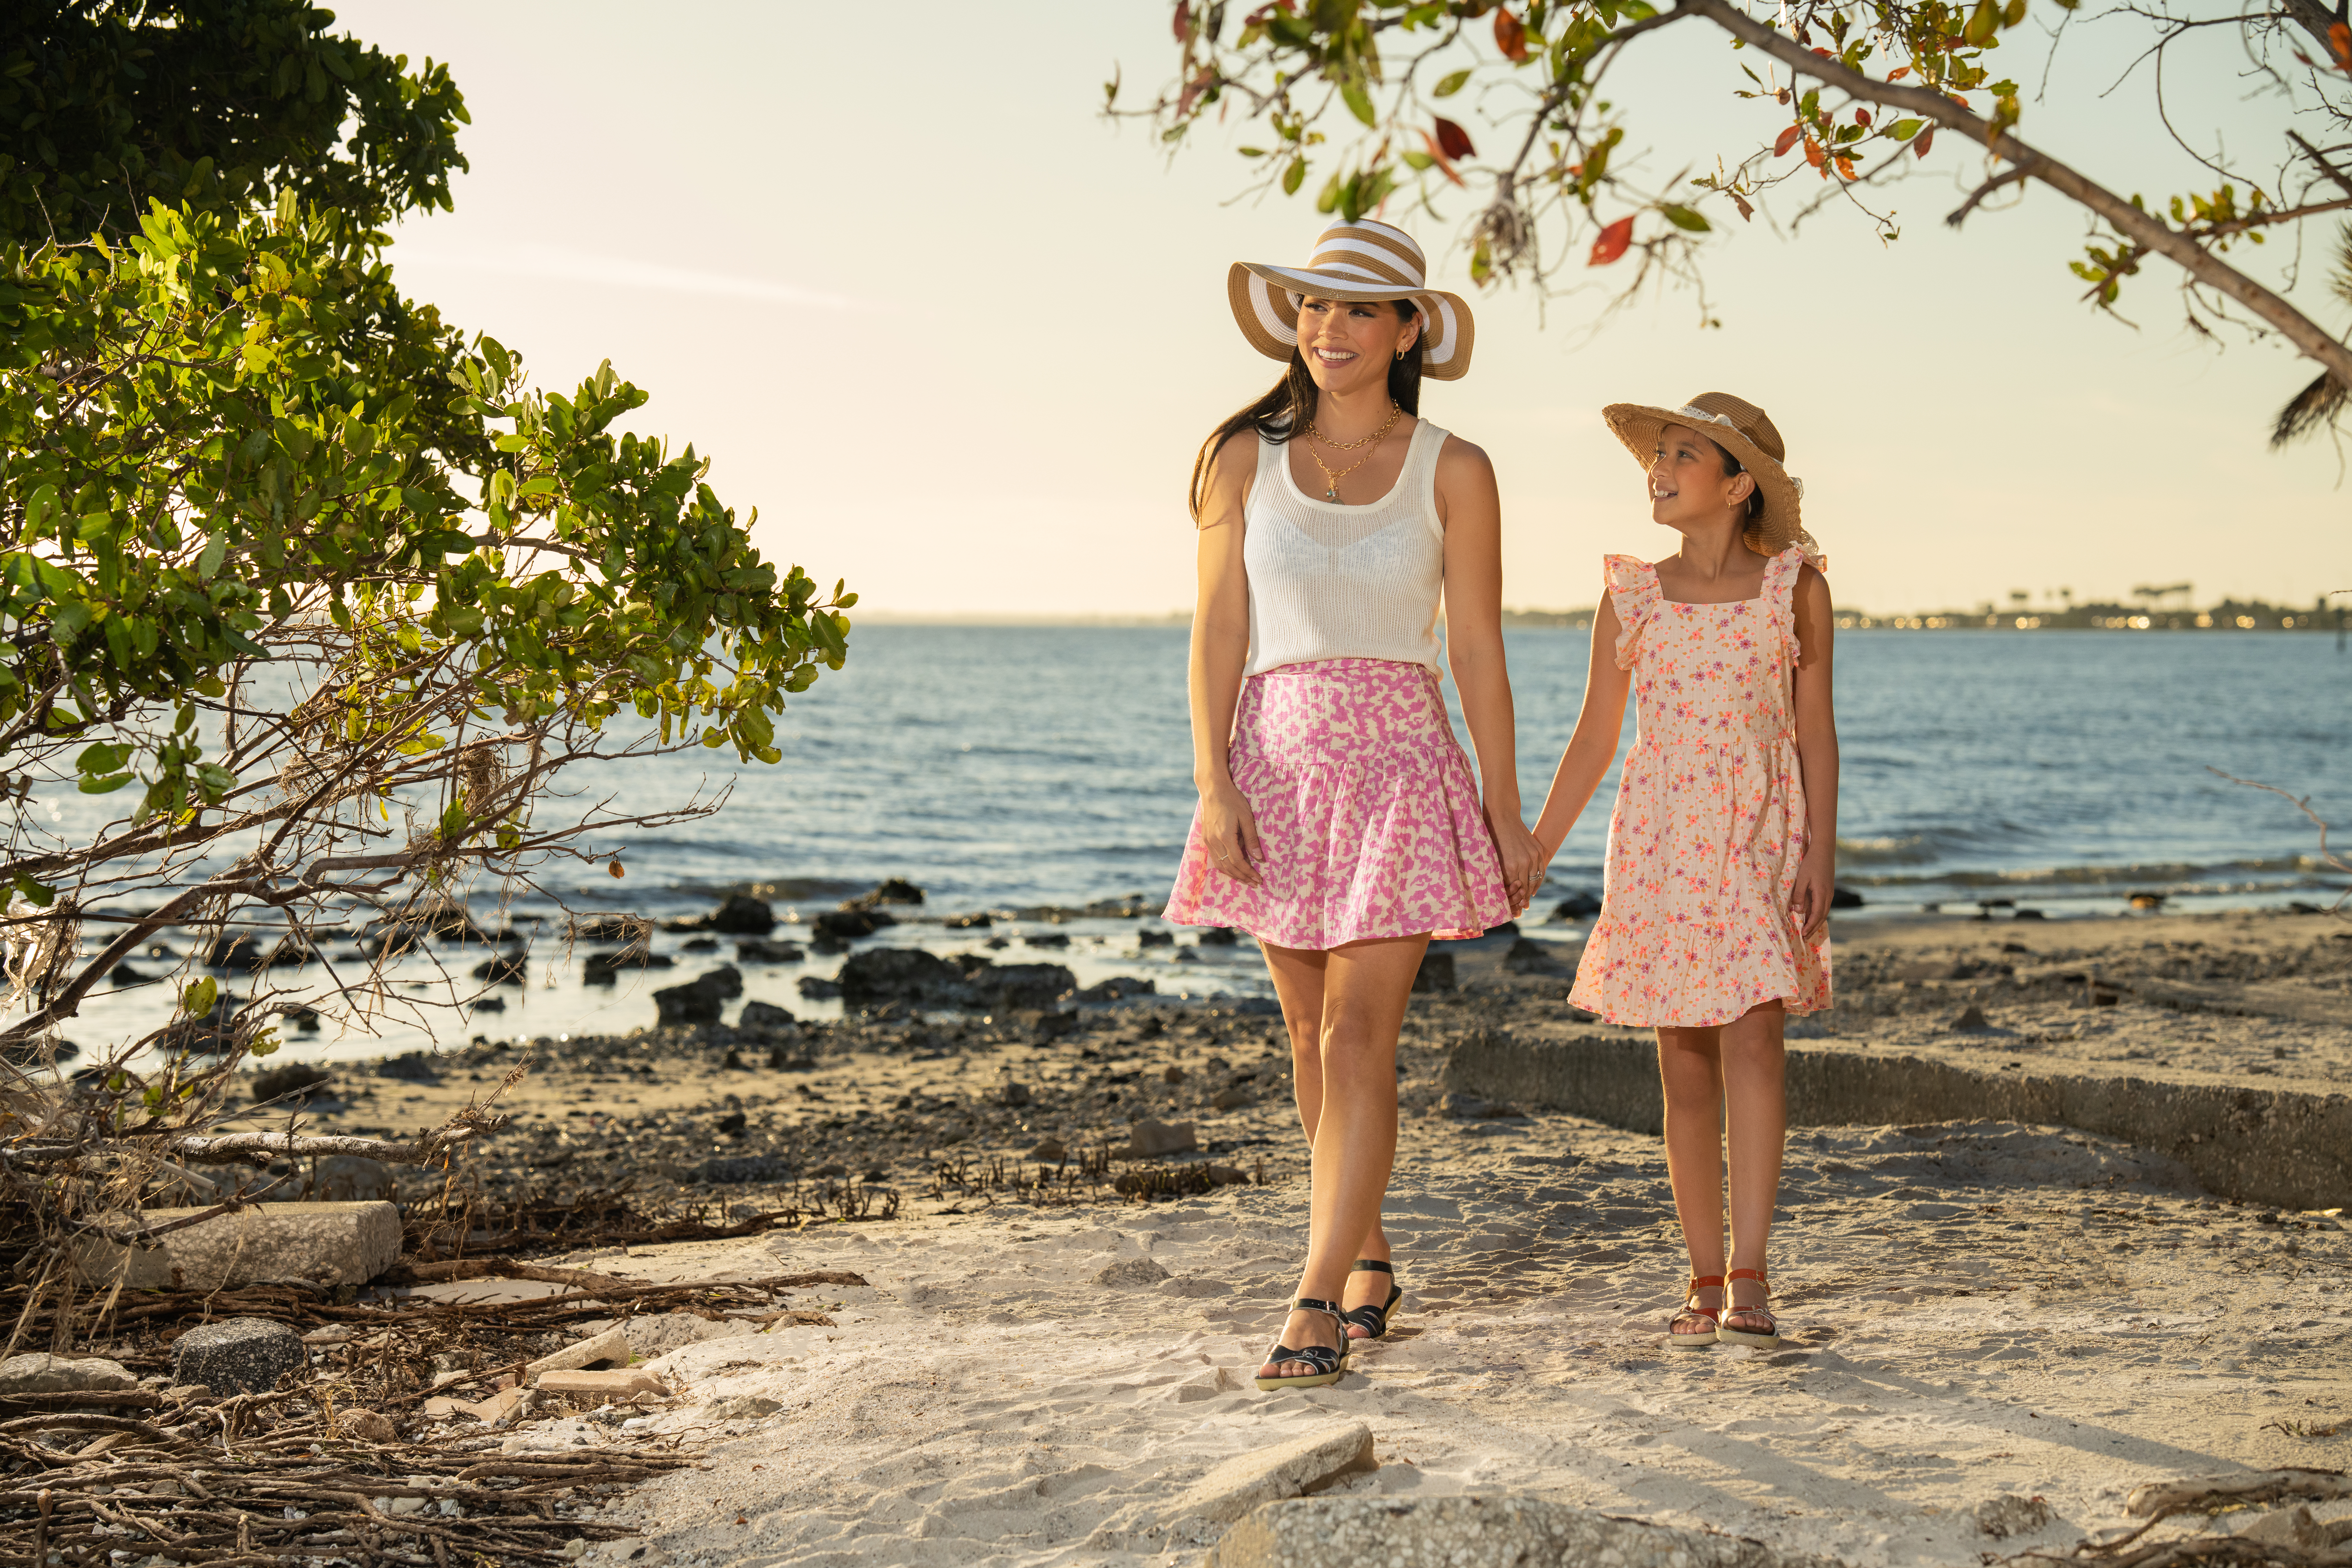 A woman and a child walking hand-in-hand on a beach modeling for Drive Social Media's ecommerce photoshoot.